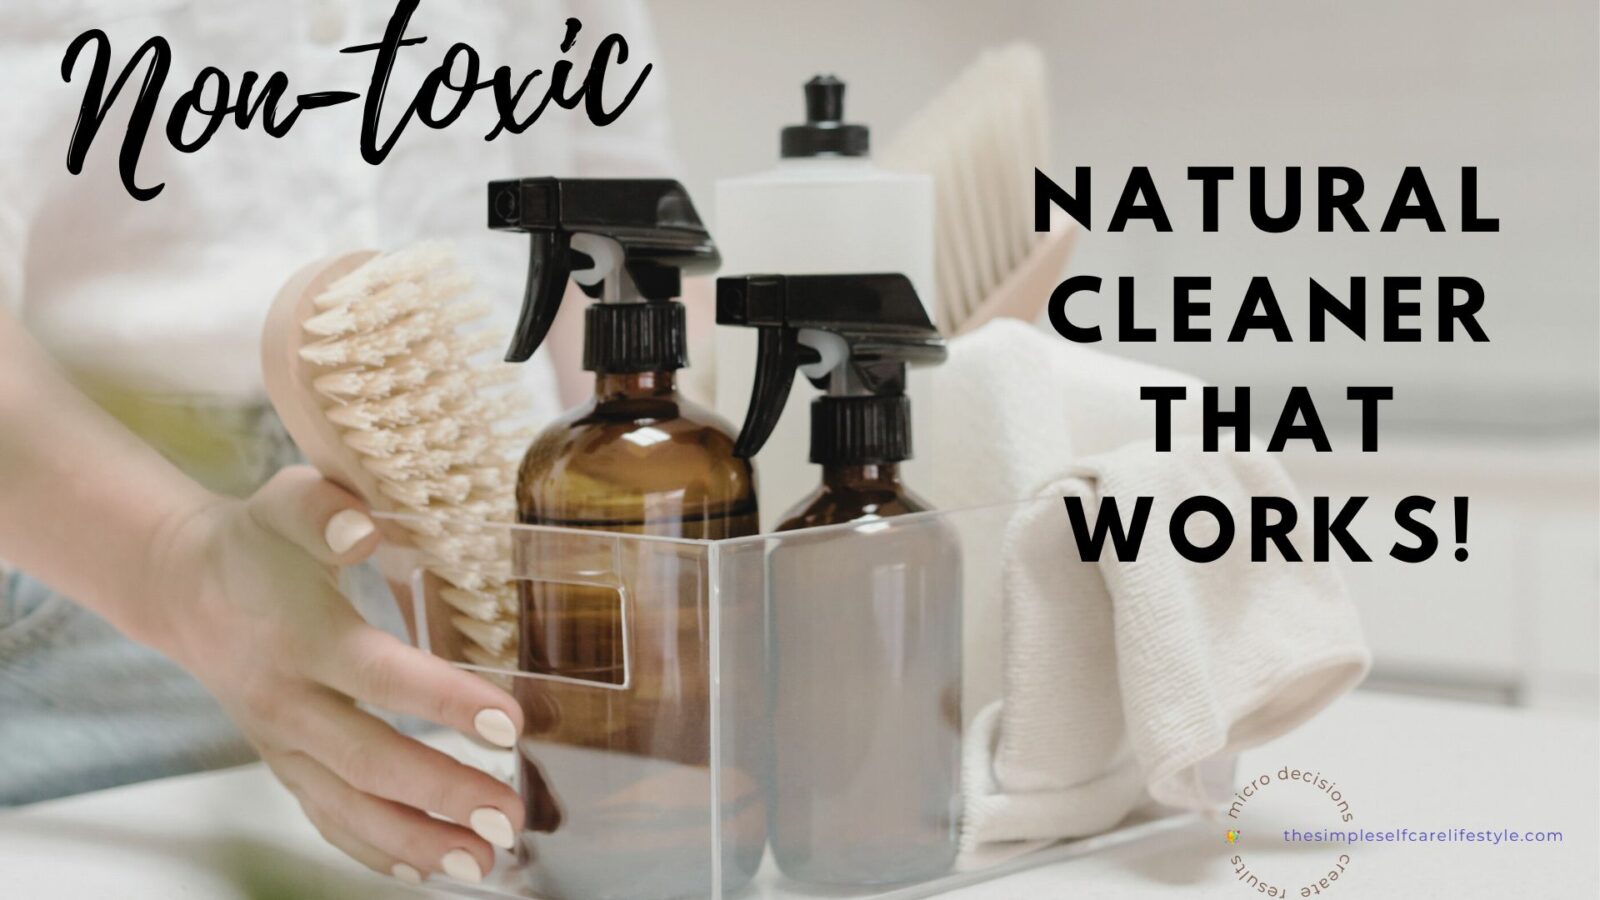 Natural Cleaner That Works!